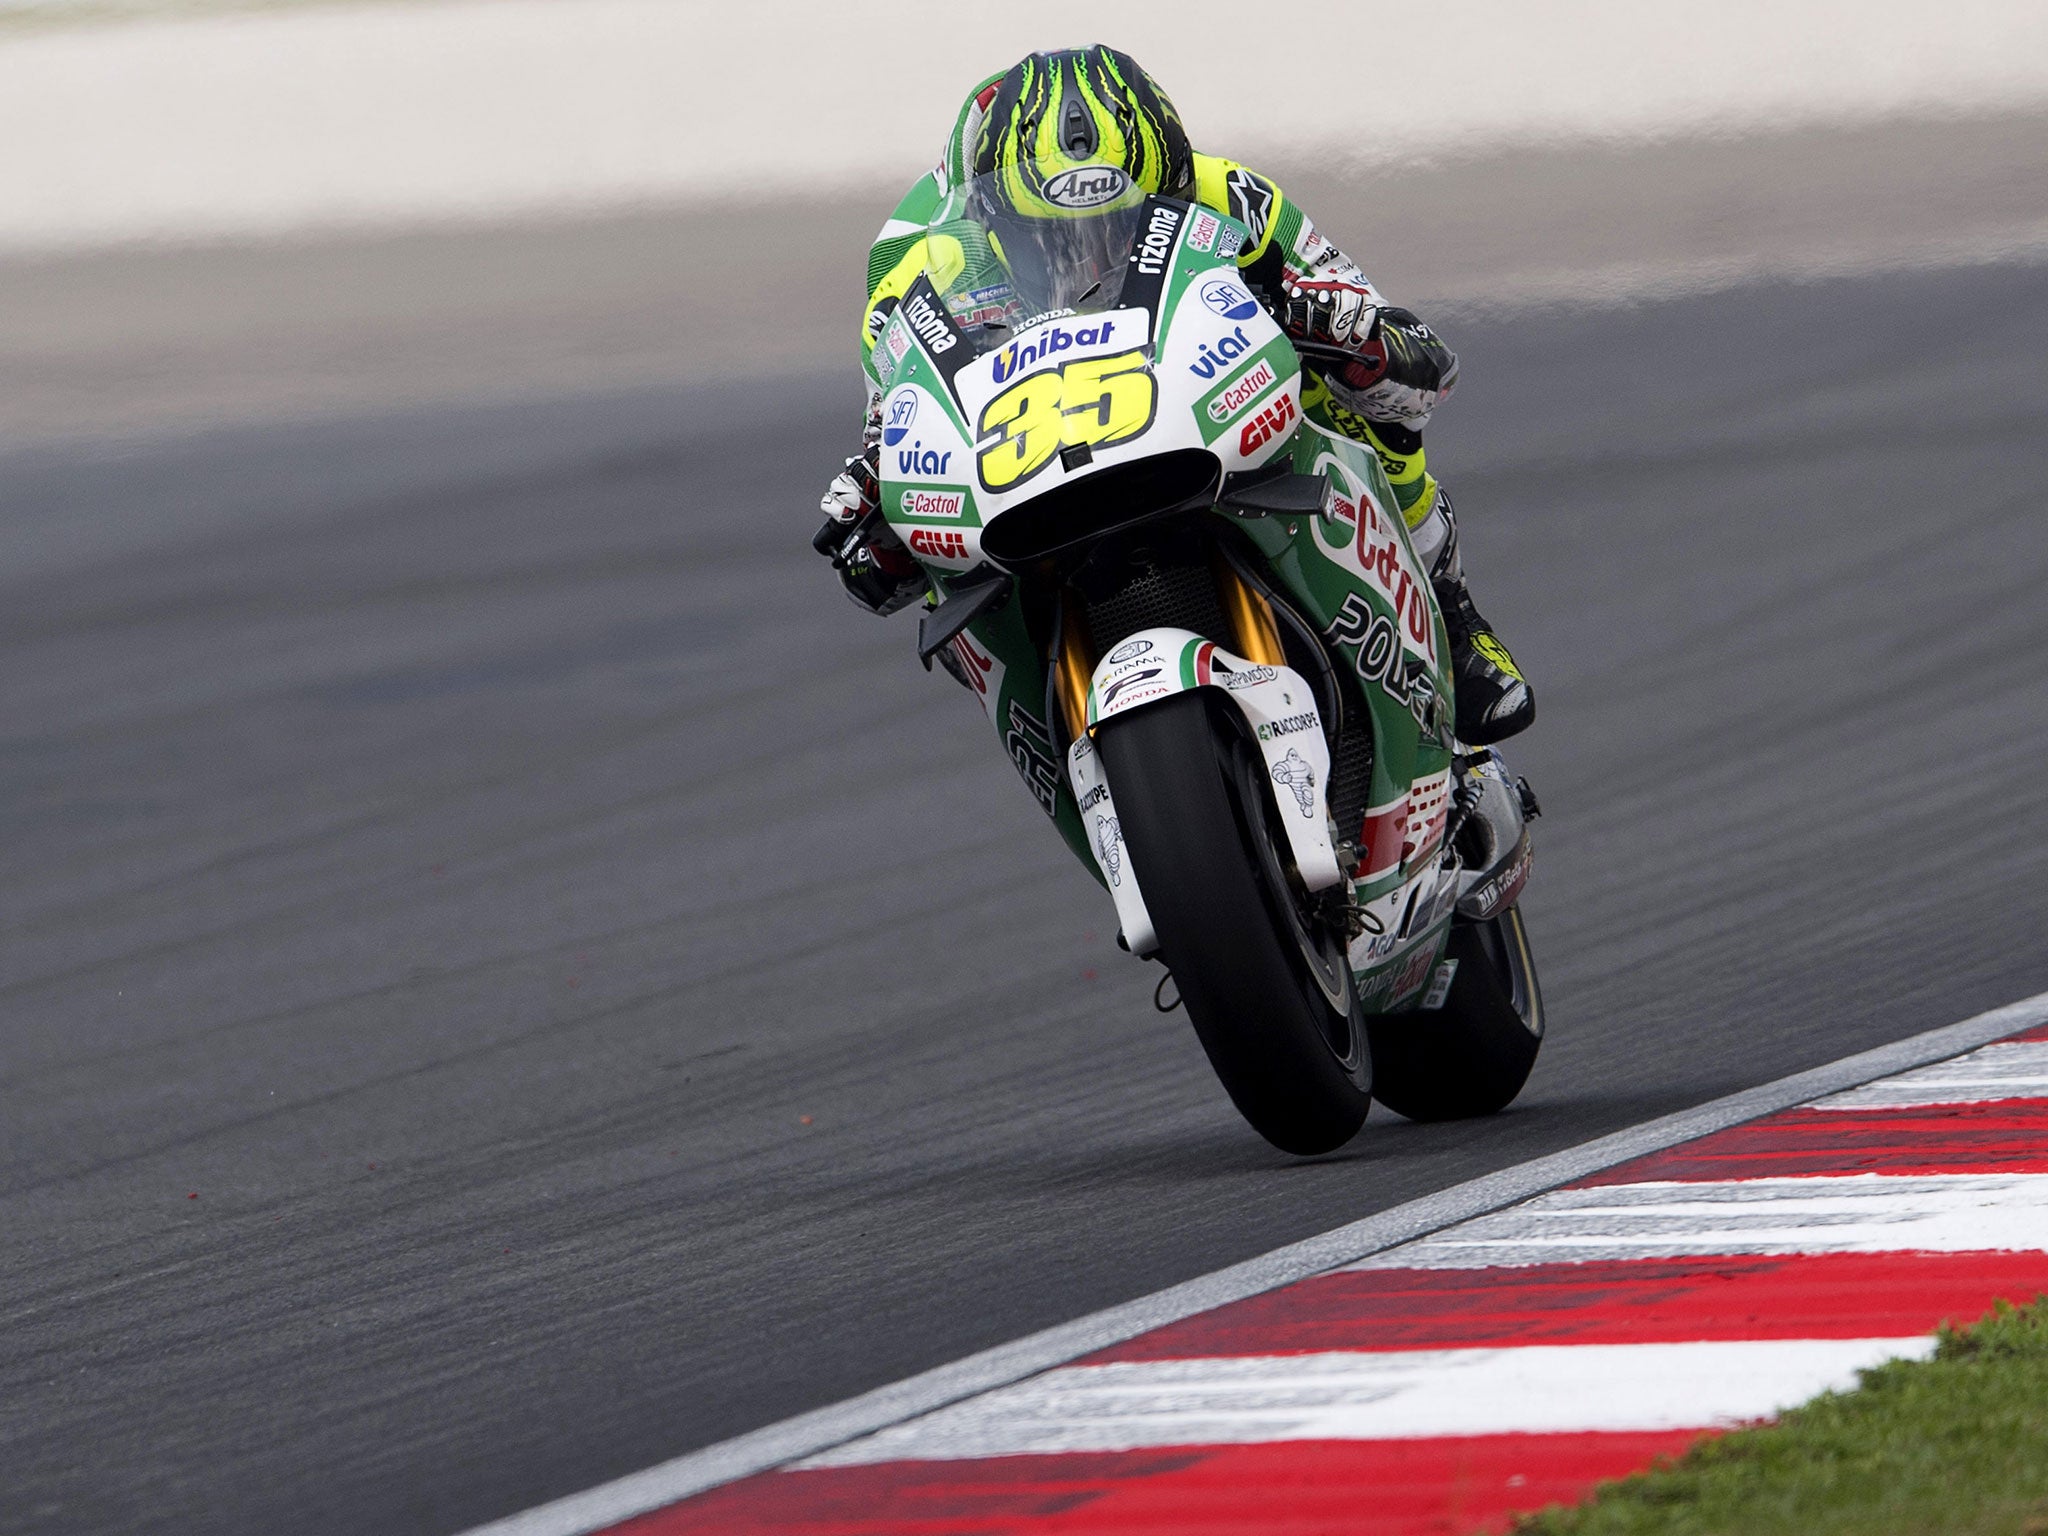 Crutchlow says he is focusing on the Valencia Grand Prix before thinking about next year